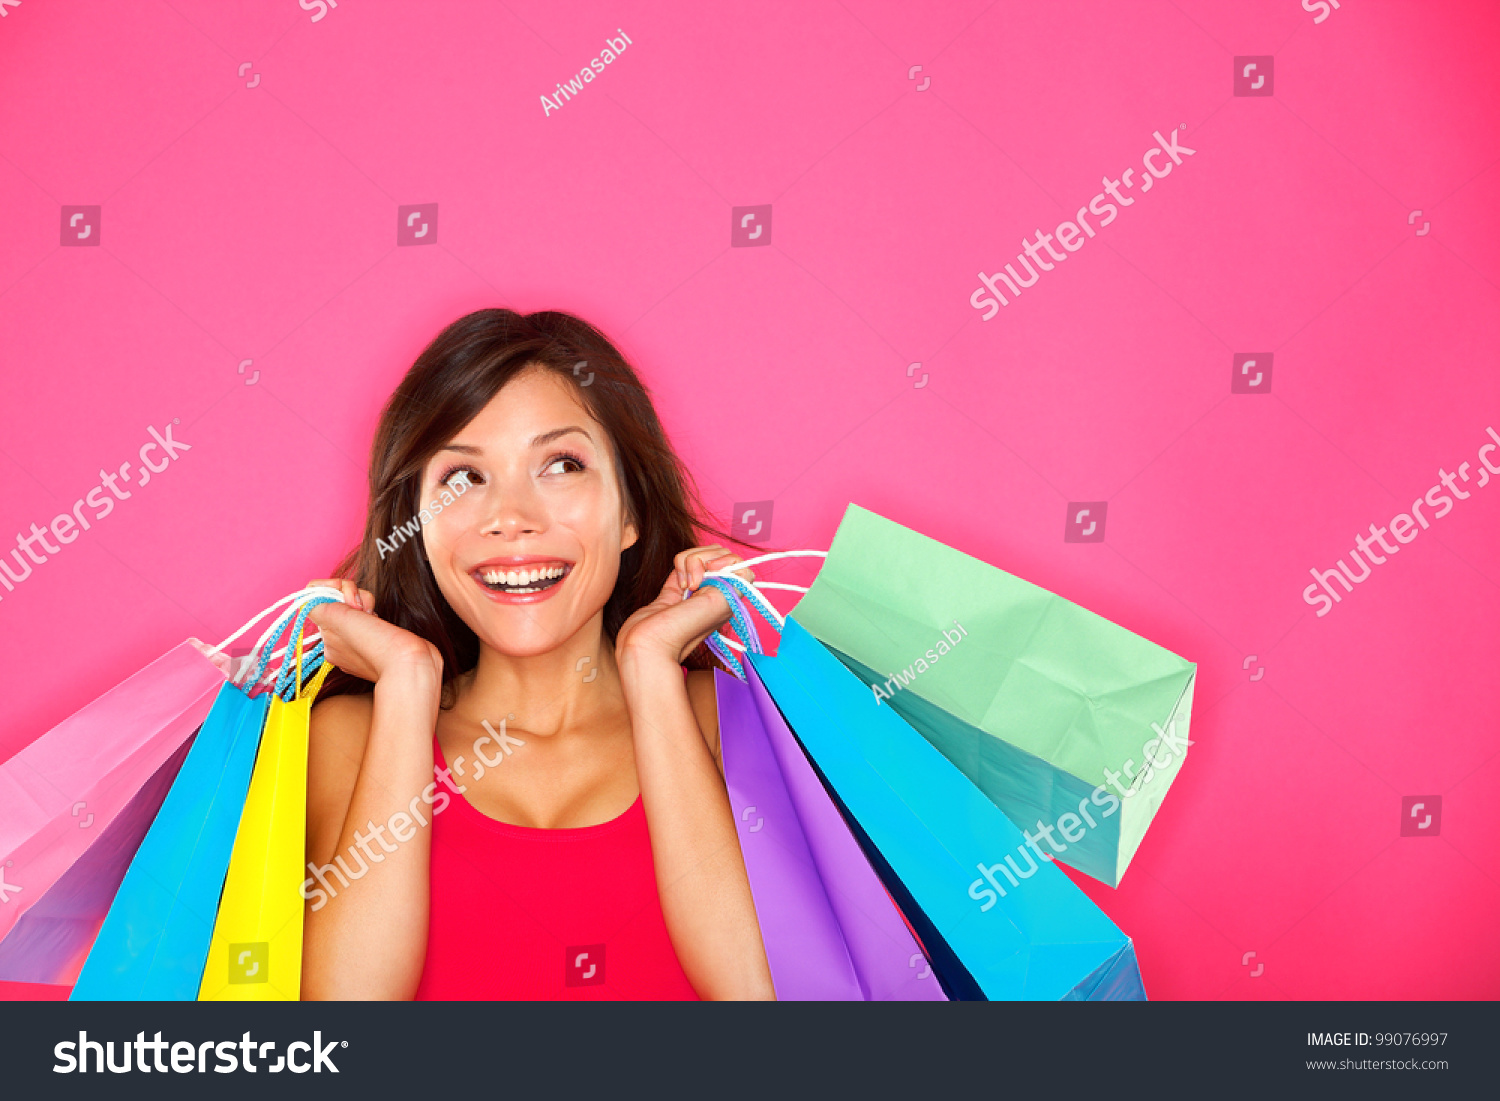 Shopping woman holding shopping bags looking up to the side on pink background at copy space. Beautiful young mixed race Caucasian / Chinese Asian shopper smiling happy. #99076997